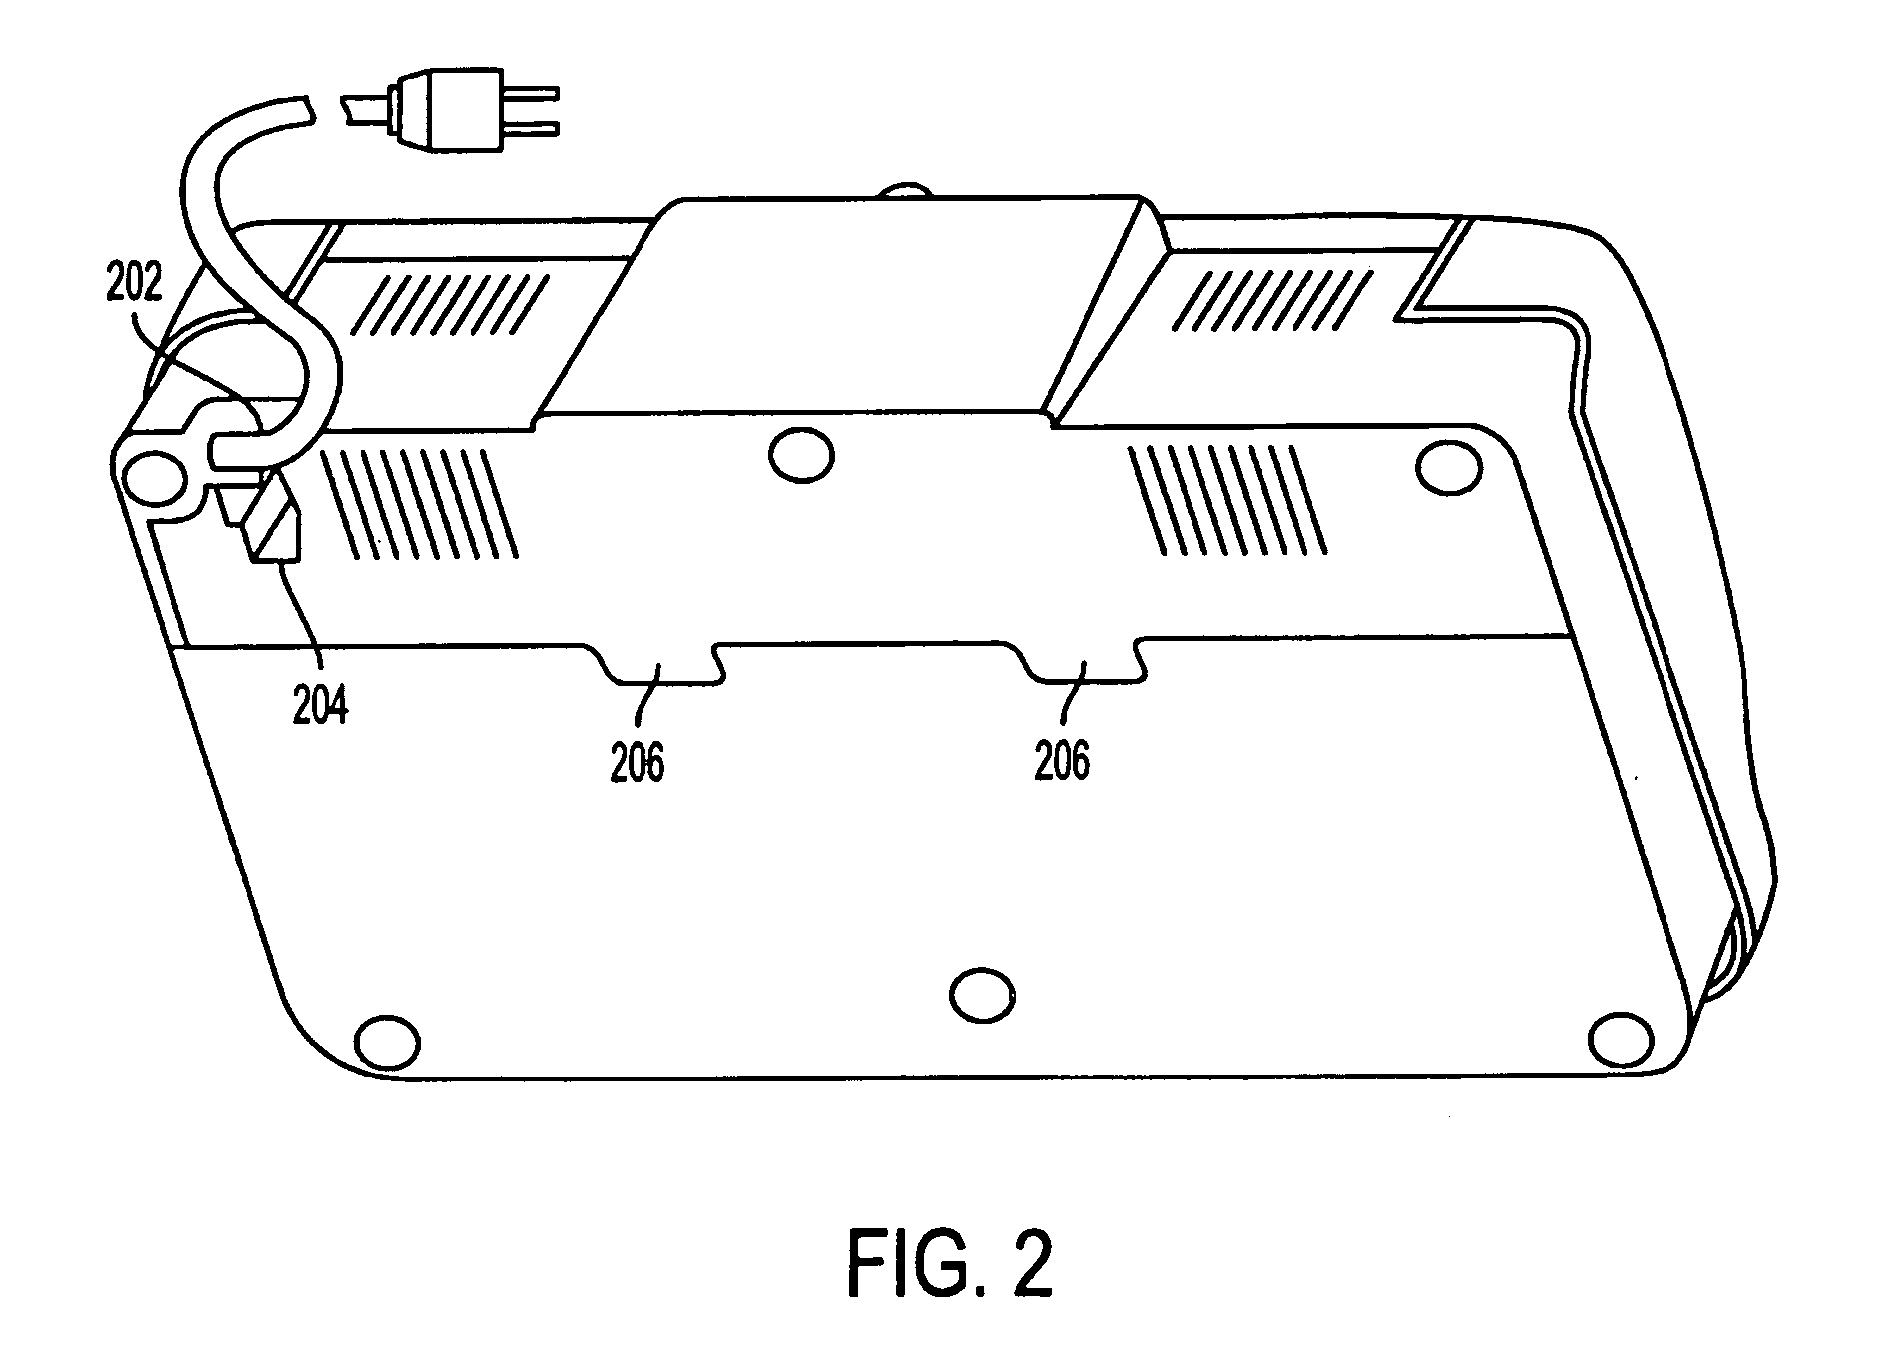 Heat sealing element and control of same